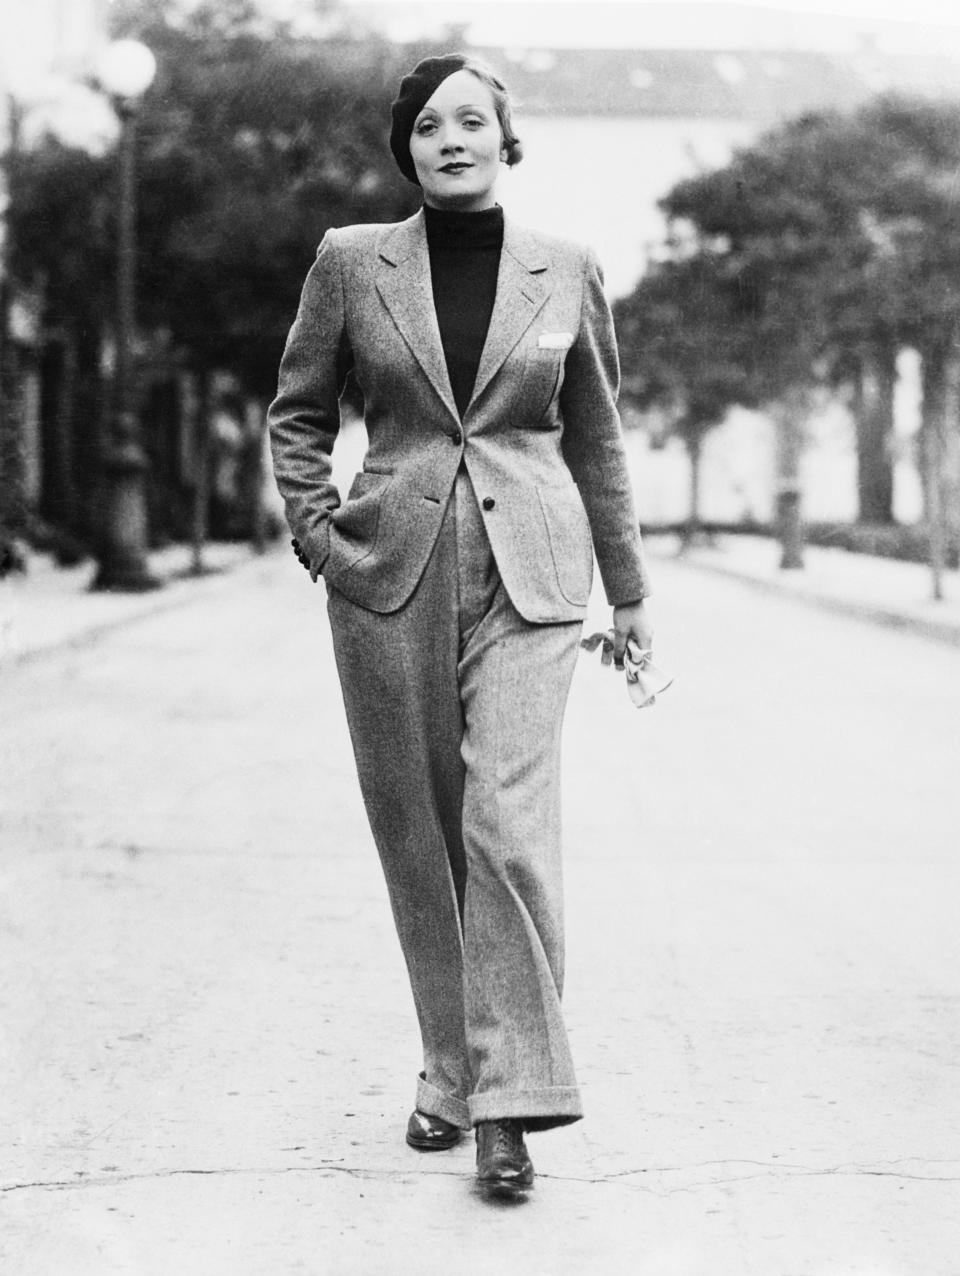 Dietrich strolls along Hollywood Street in a gray man's suit with turtleneck sweater in this undated photo, circa 1933.